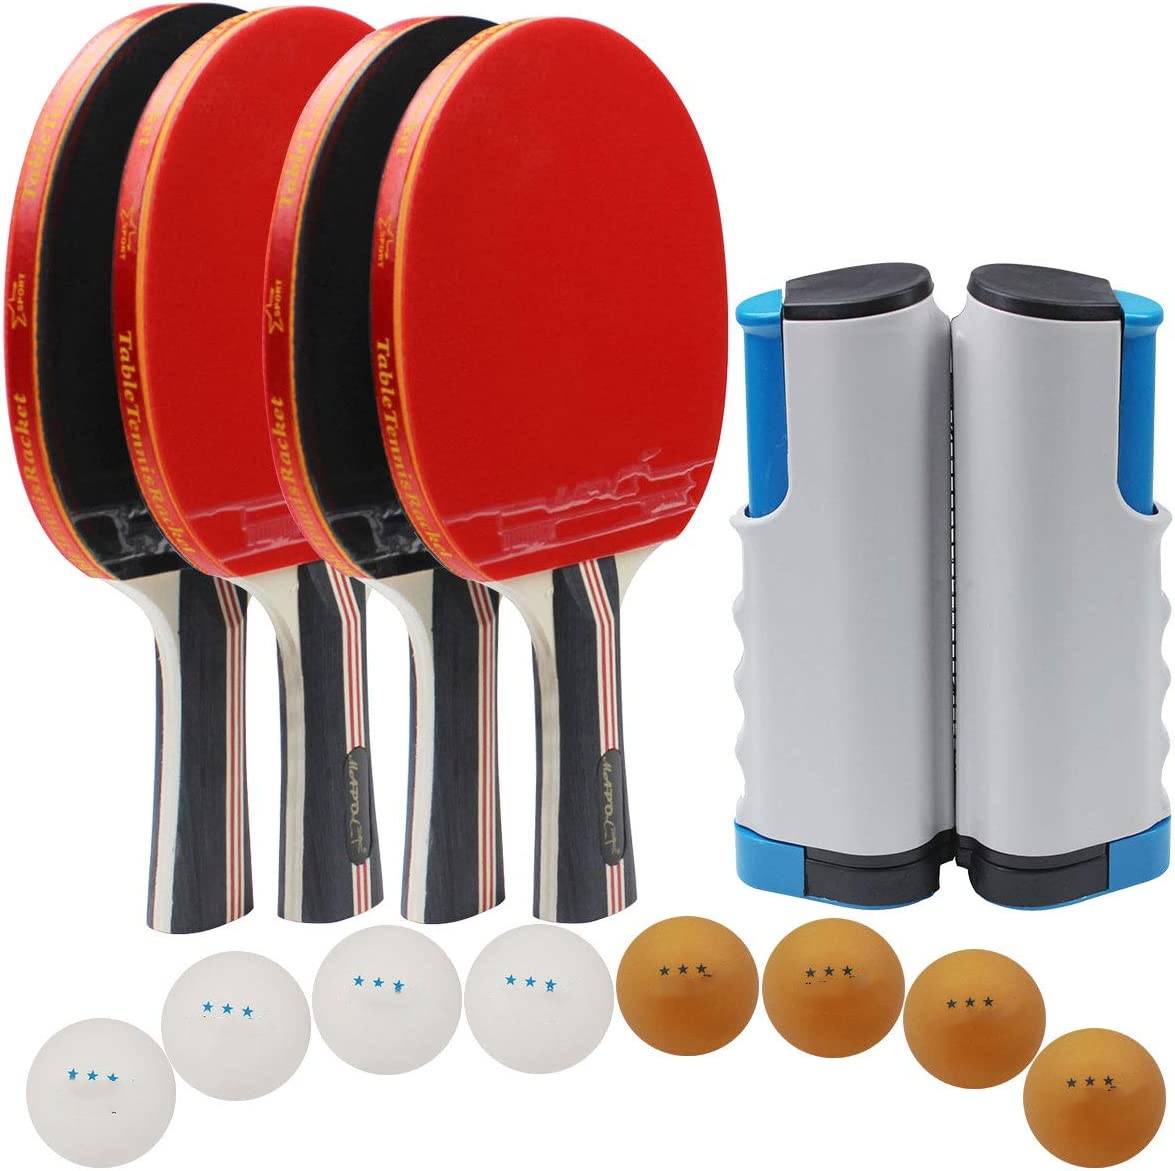 The best ping pong paddle set 0636, Portable Table Tennis Set with Retractable Net, Perfect for Professional Play and Amateurs